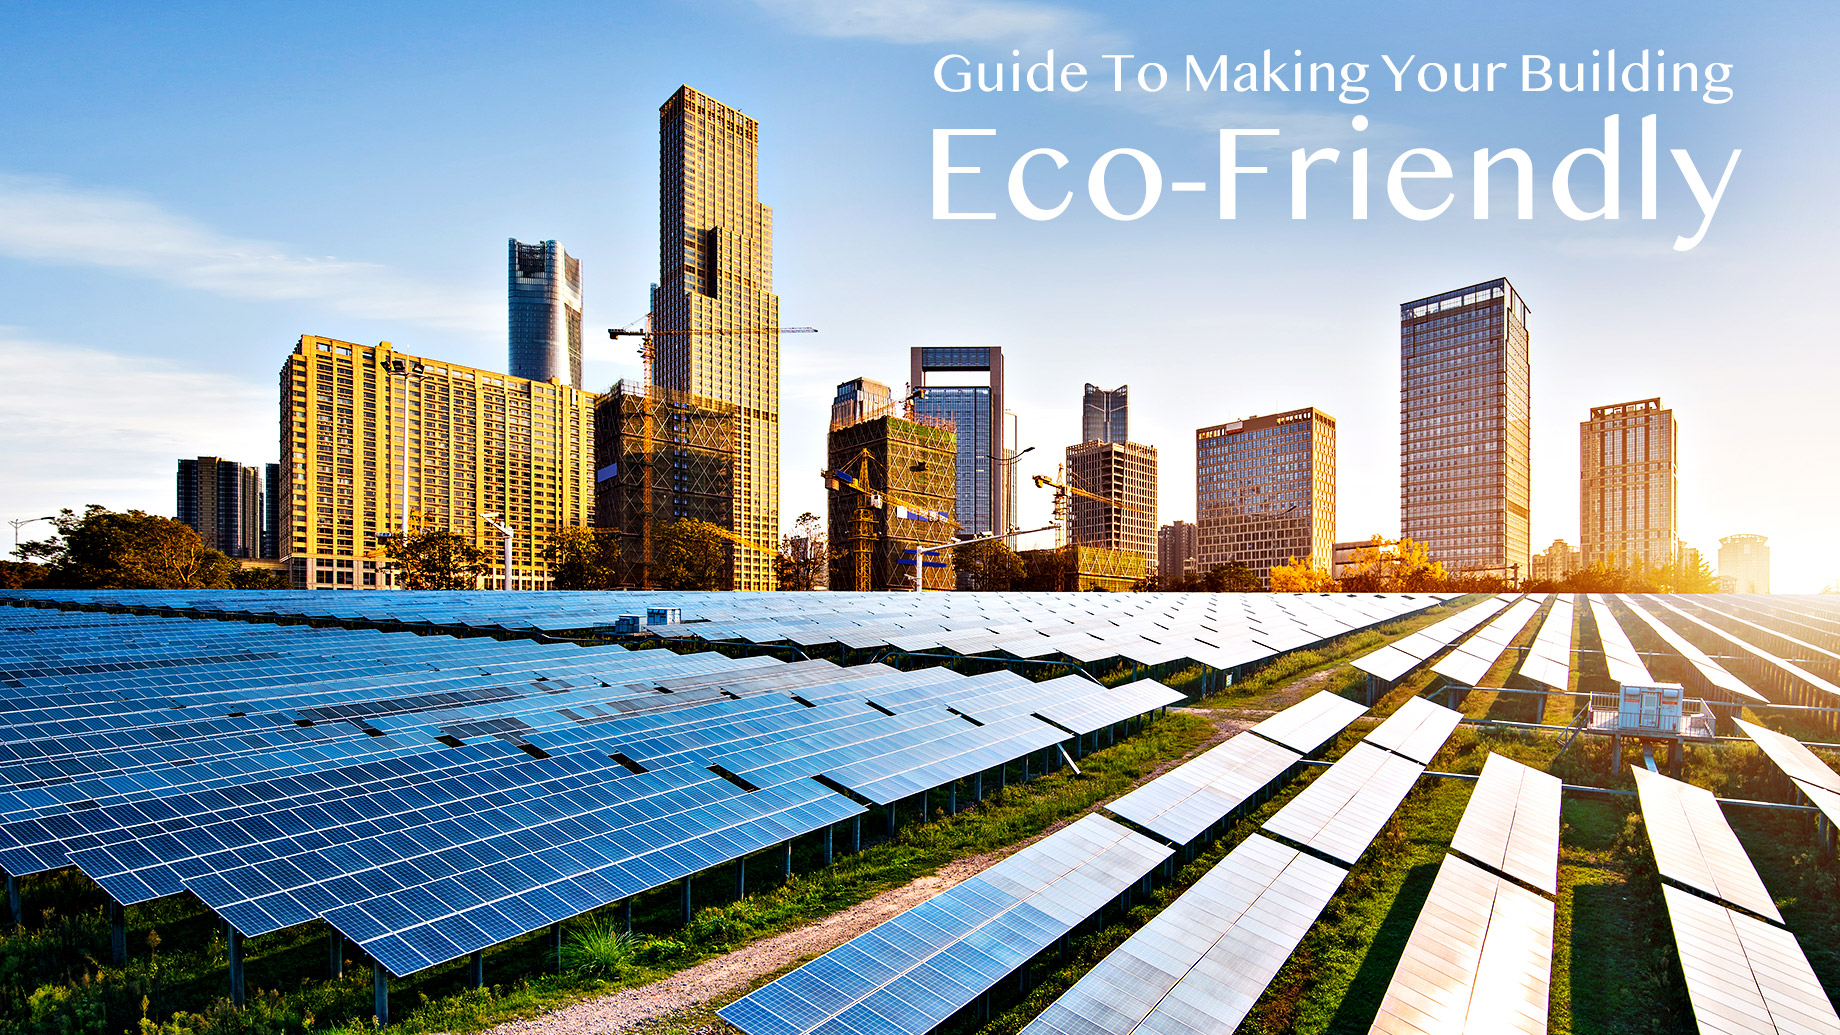 Guide To Making Your Building Eco-Friendly